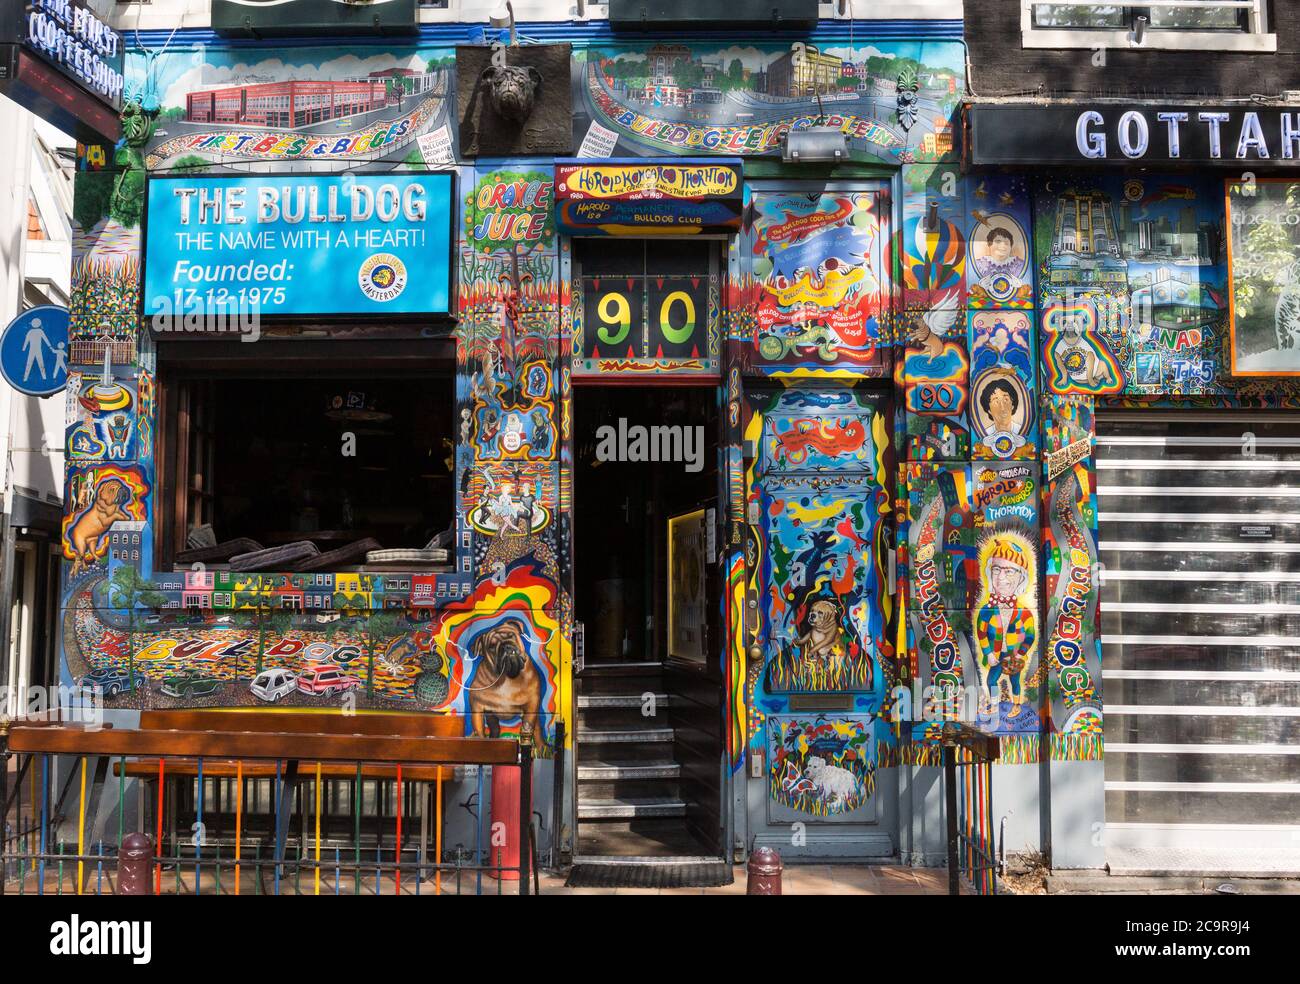 The colorful facade of The Bulldog Coffee Shop that sells smoker products in Amsterdam, the Netherlands, founded in 1975 Stock Photo